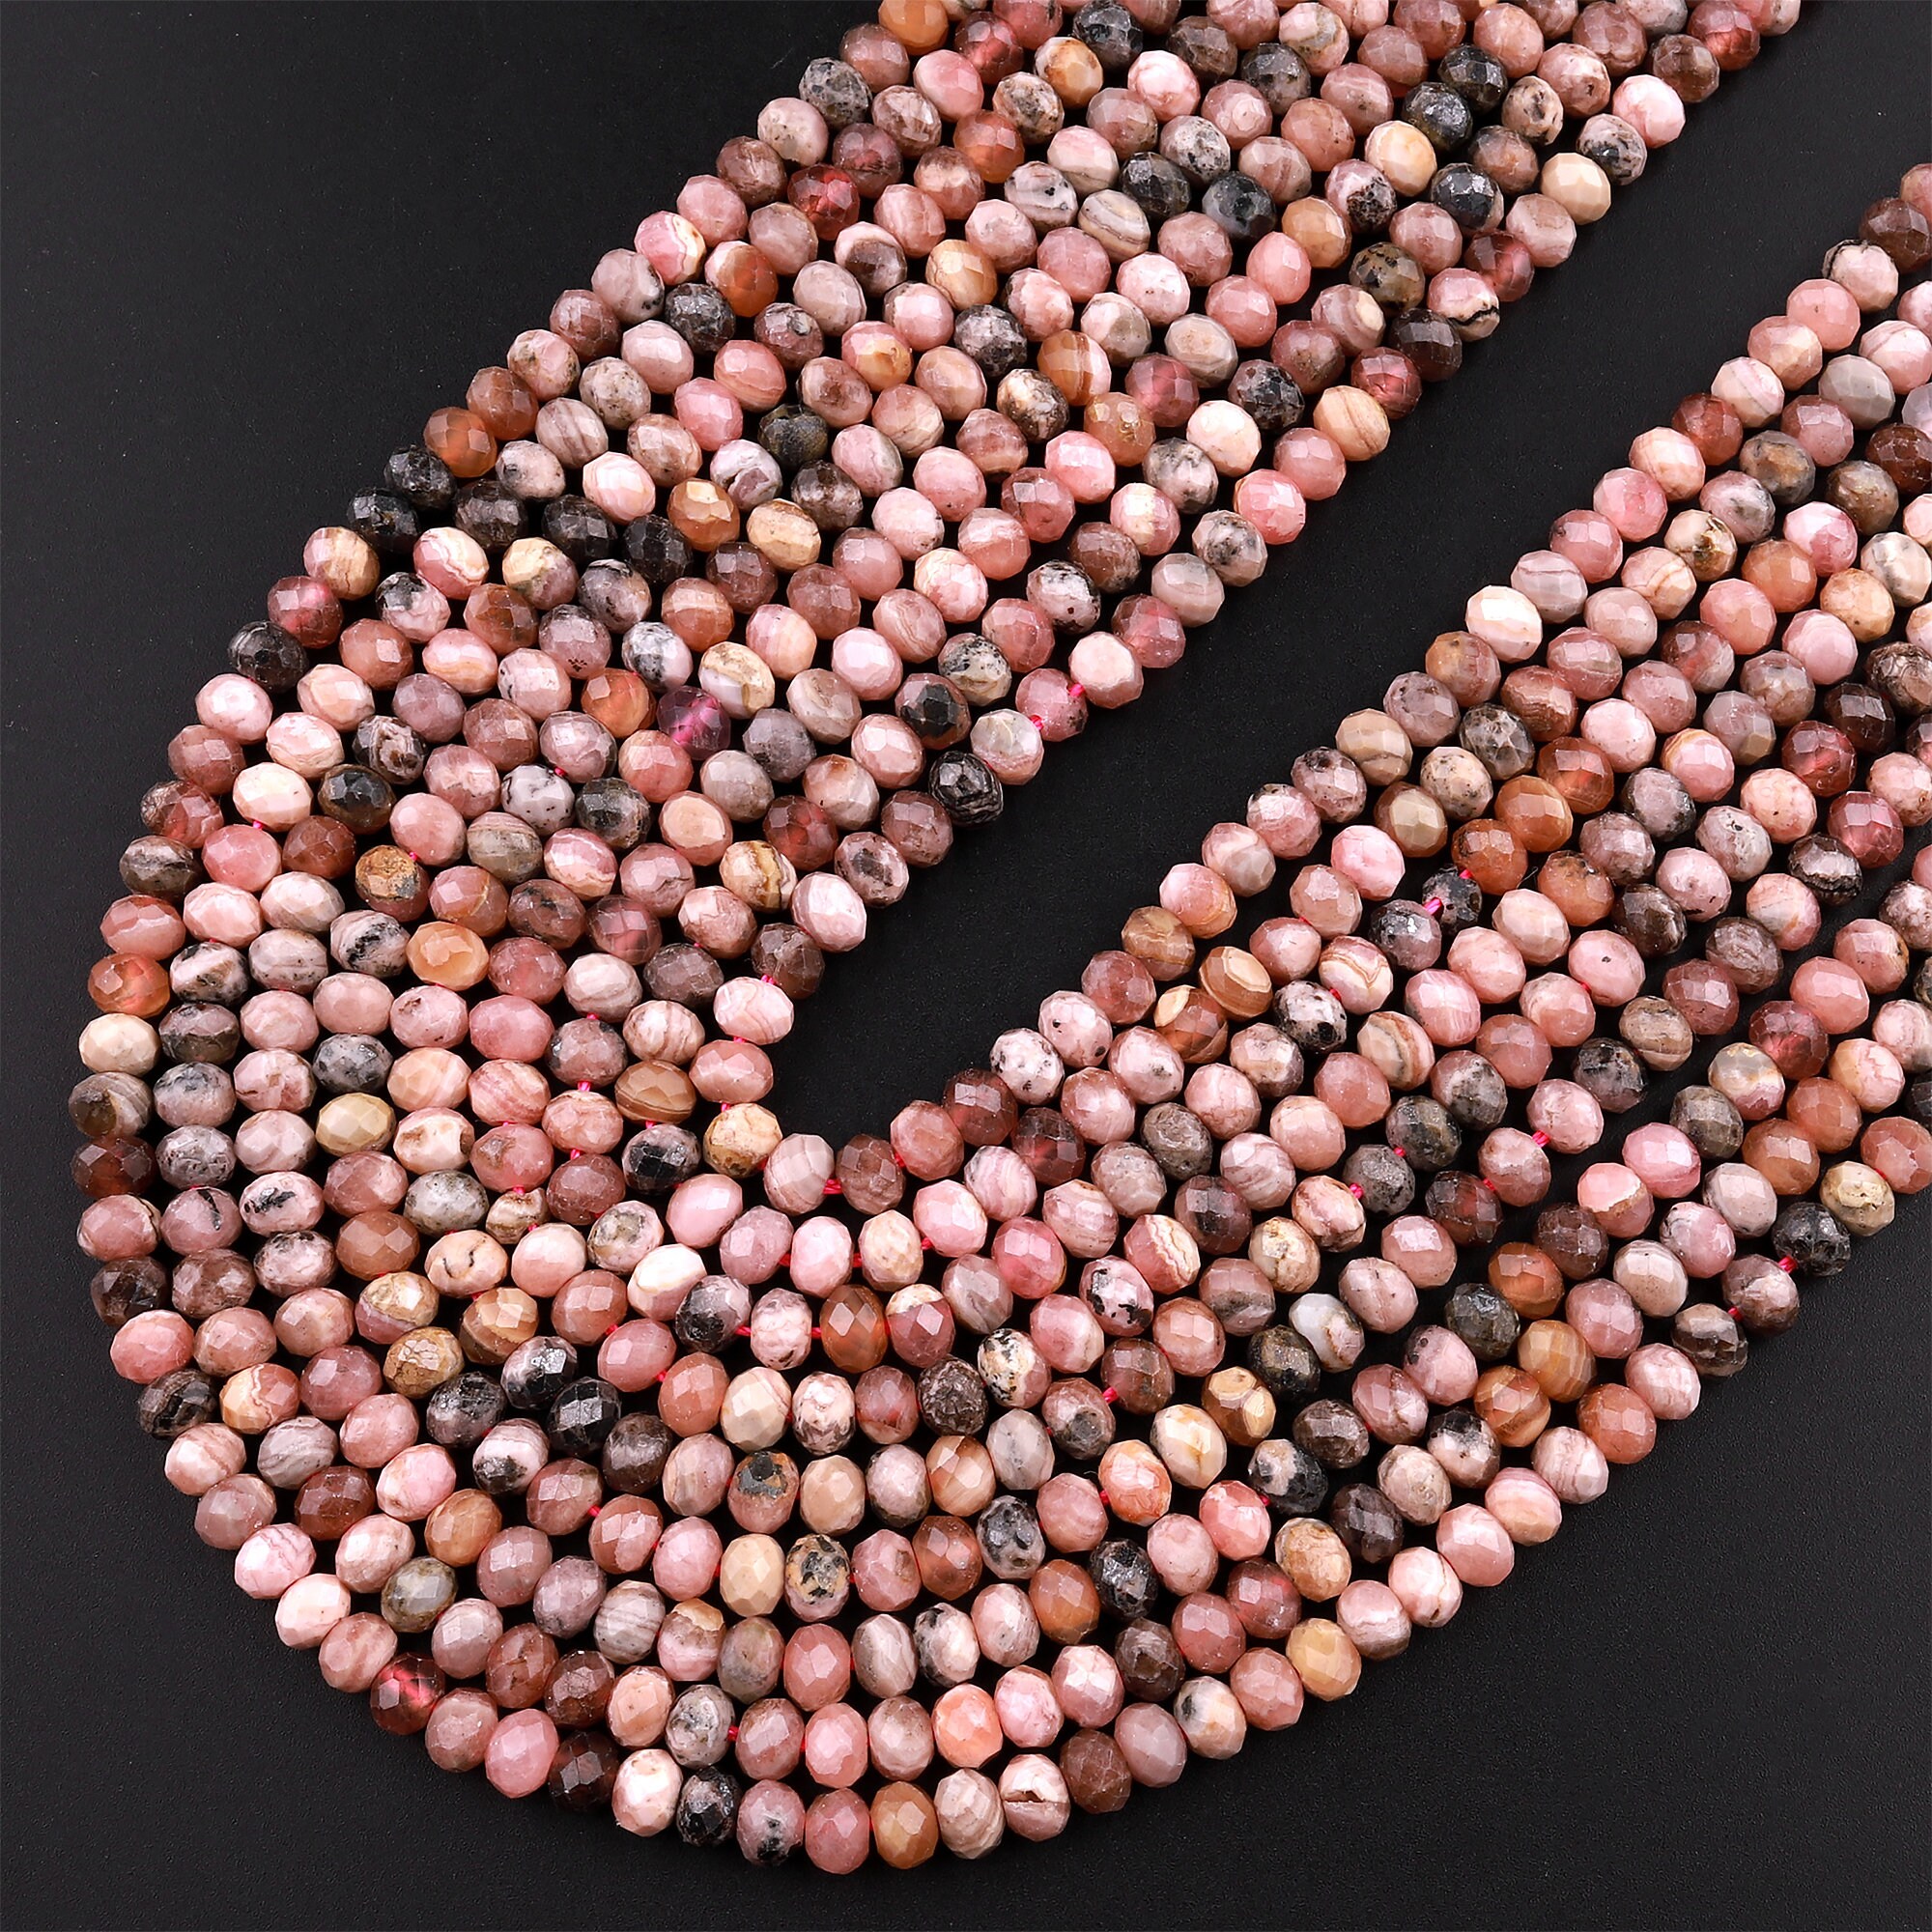 Natural Purple Opal Faceted 4mm Round Beads